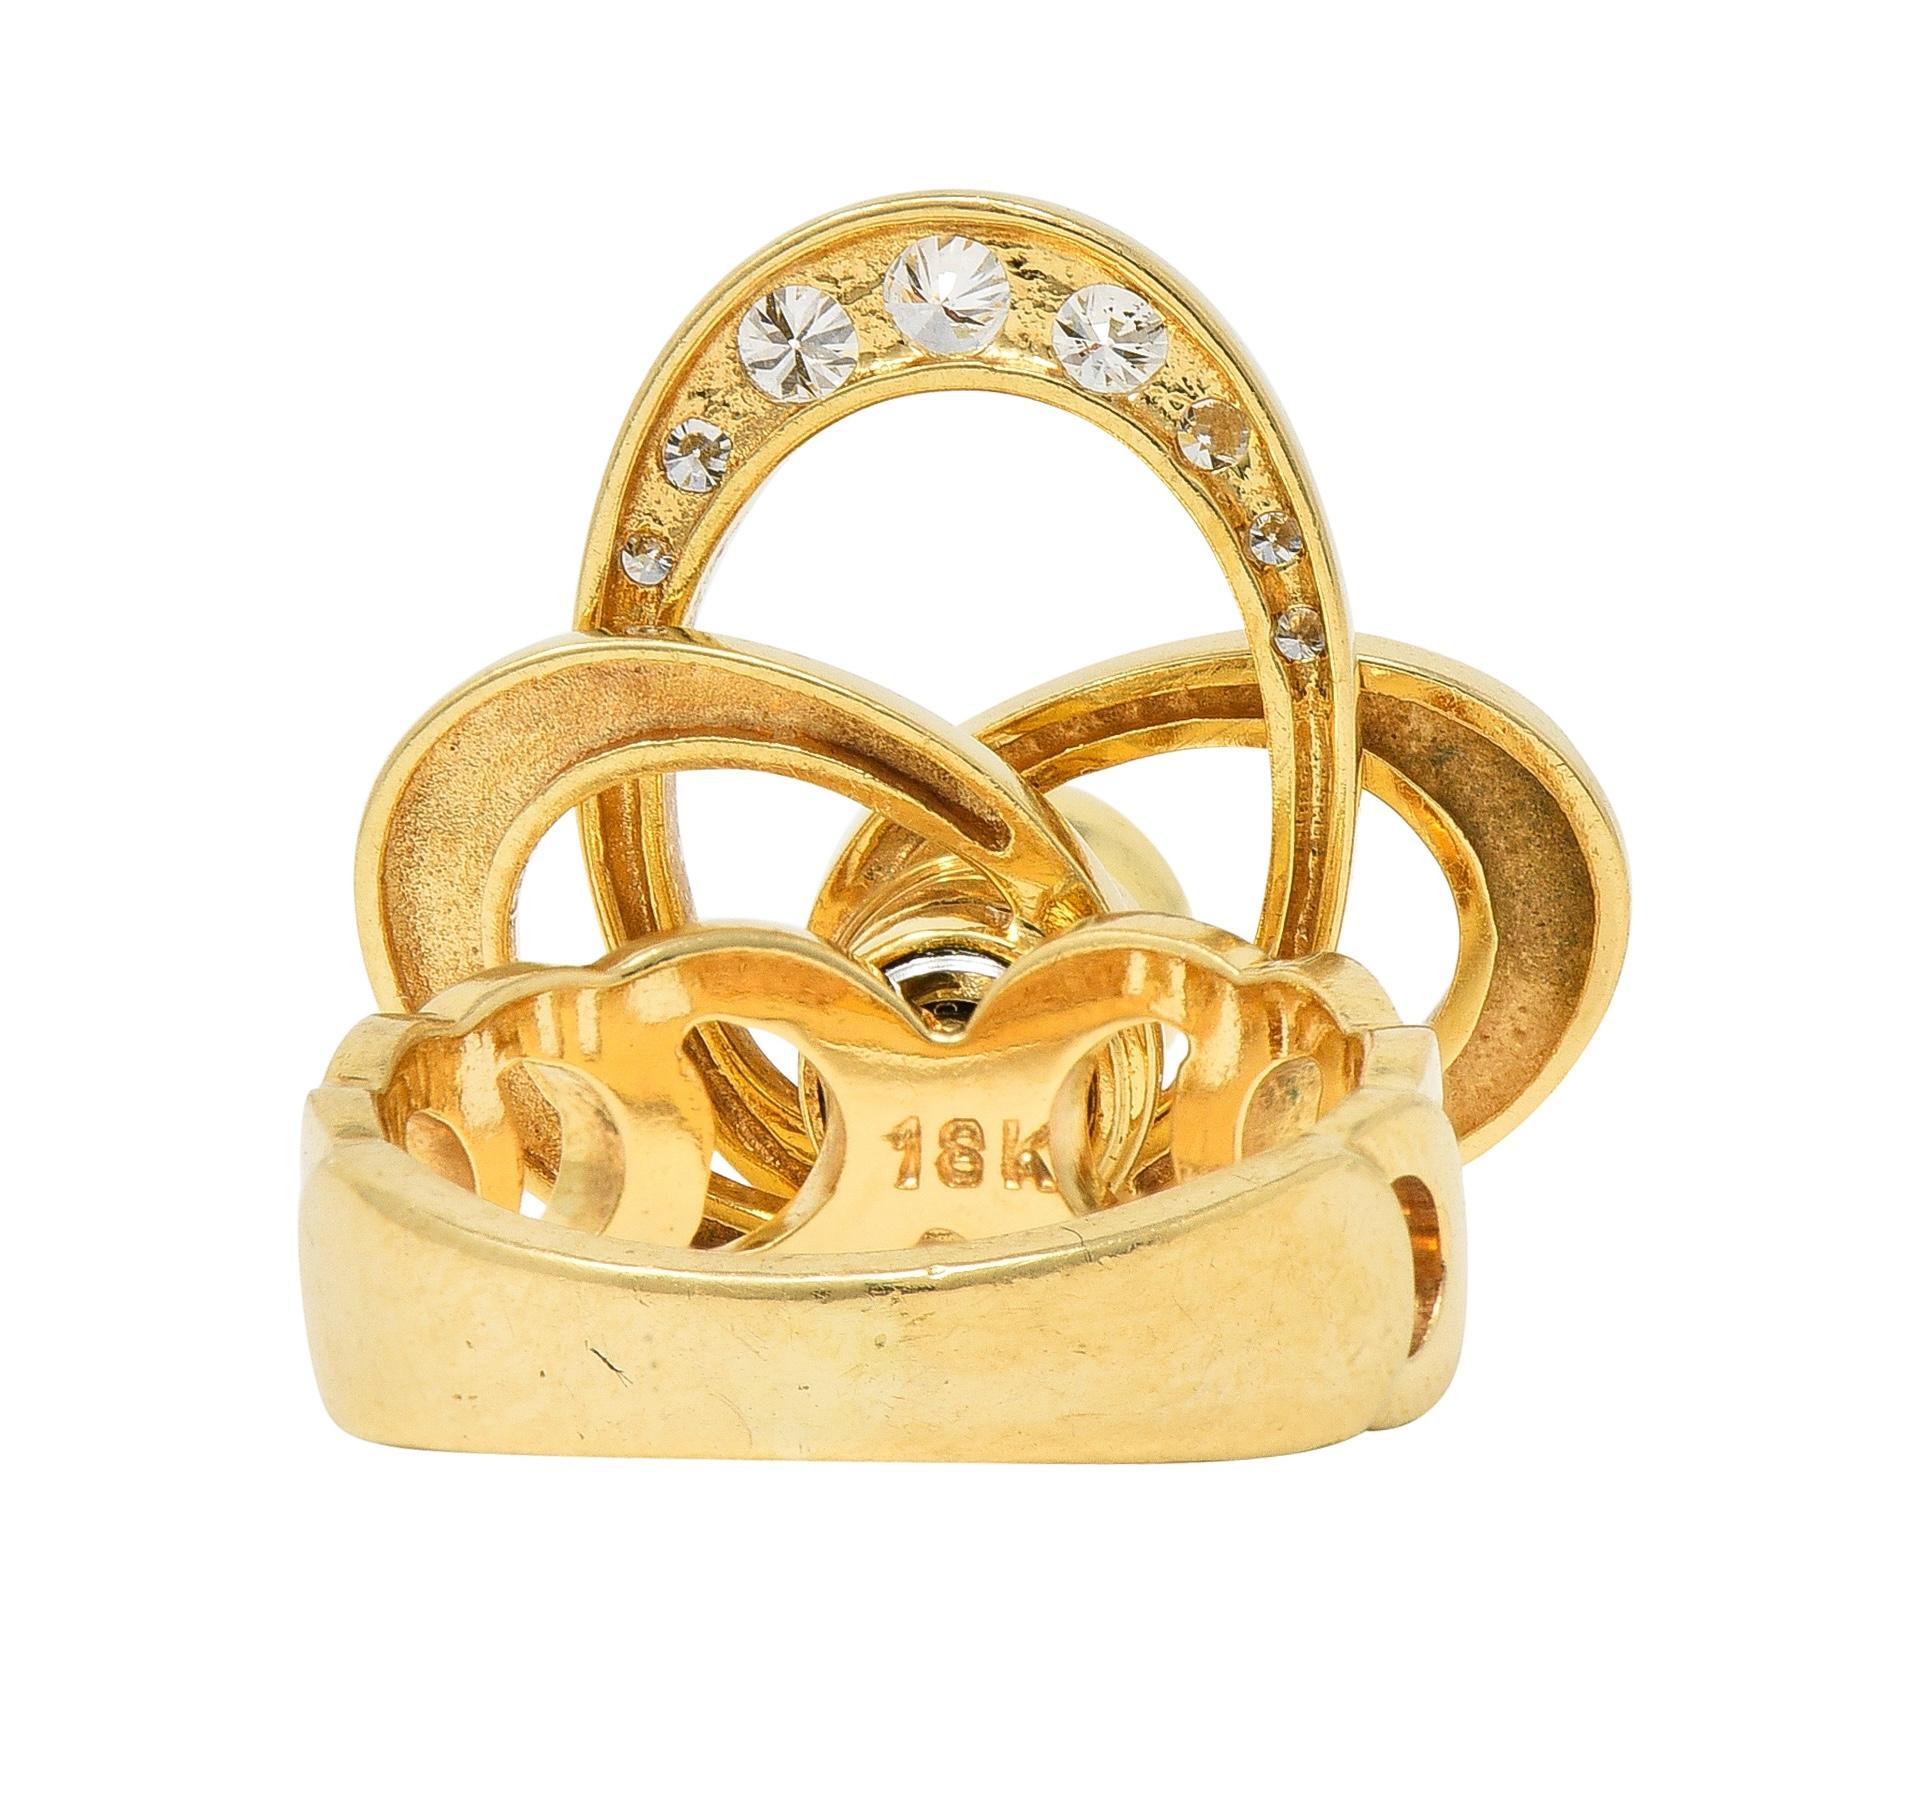 Norman Teufel Diamond 18 Karat Gold Arch Vintage Kinetic Fidget Spinning Ring In Excellent Condition For Sale In Philadelphia, PA